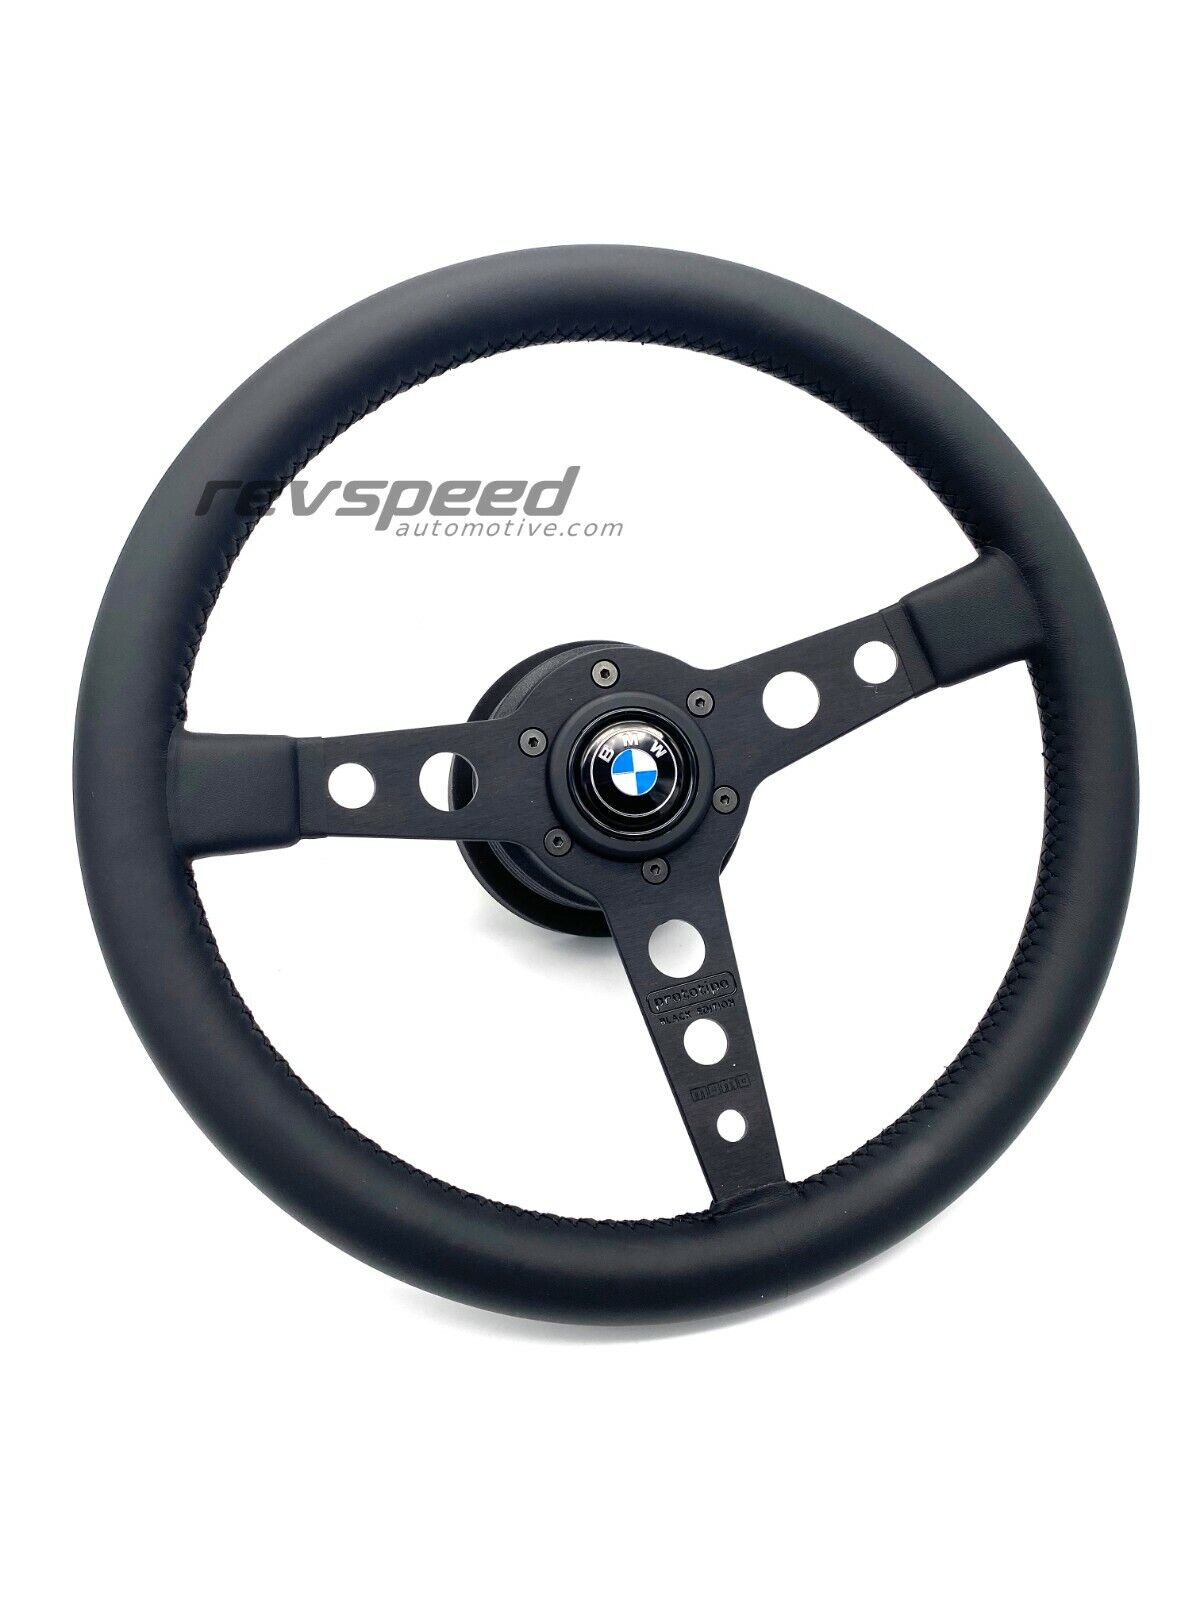 MOMO Prototipo Black Edition Steering Wheel Kit with Horn Button for BMW E30 M3